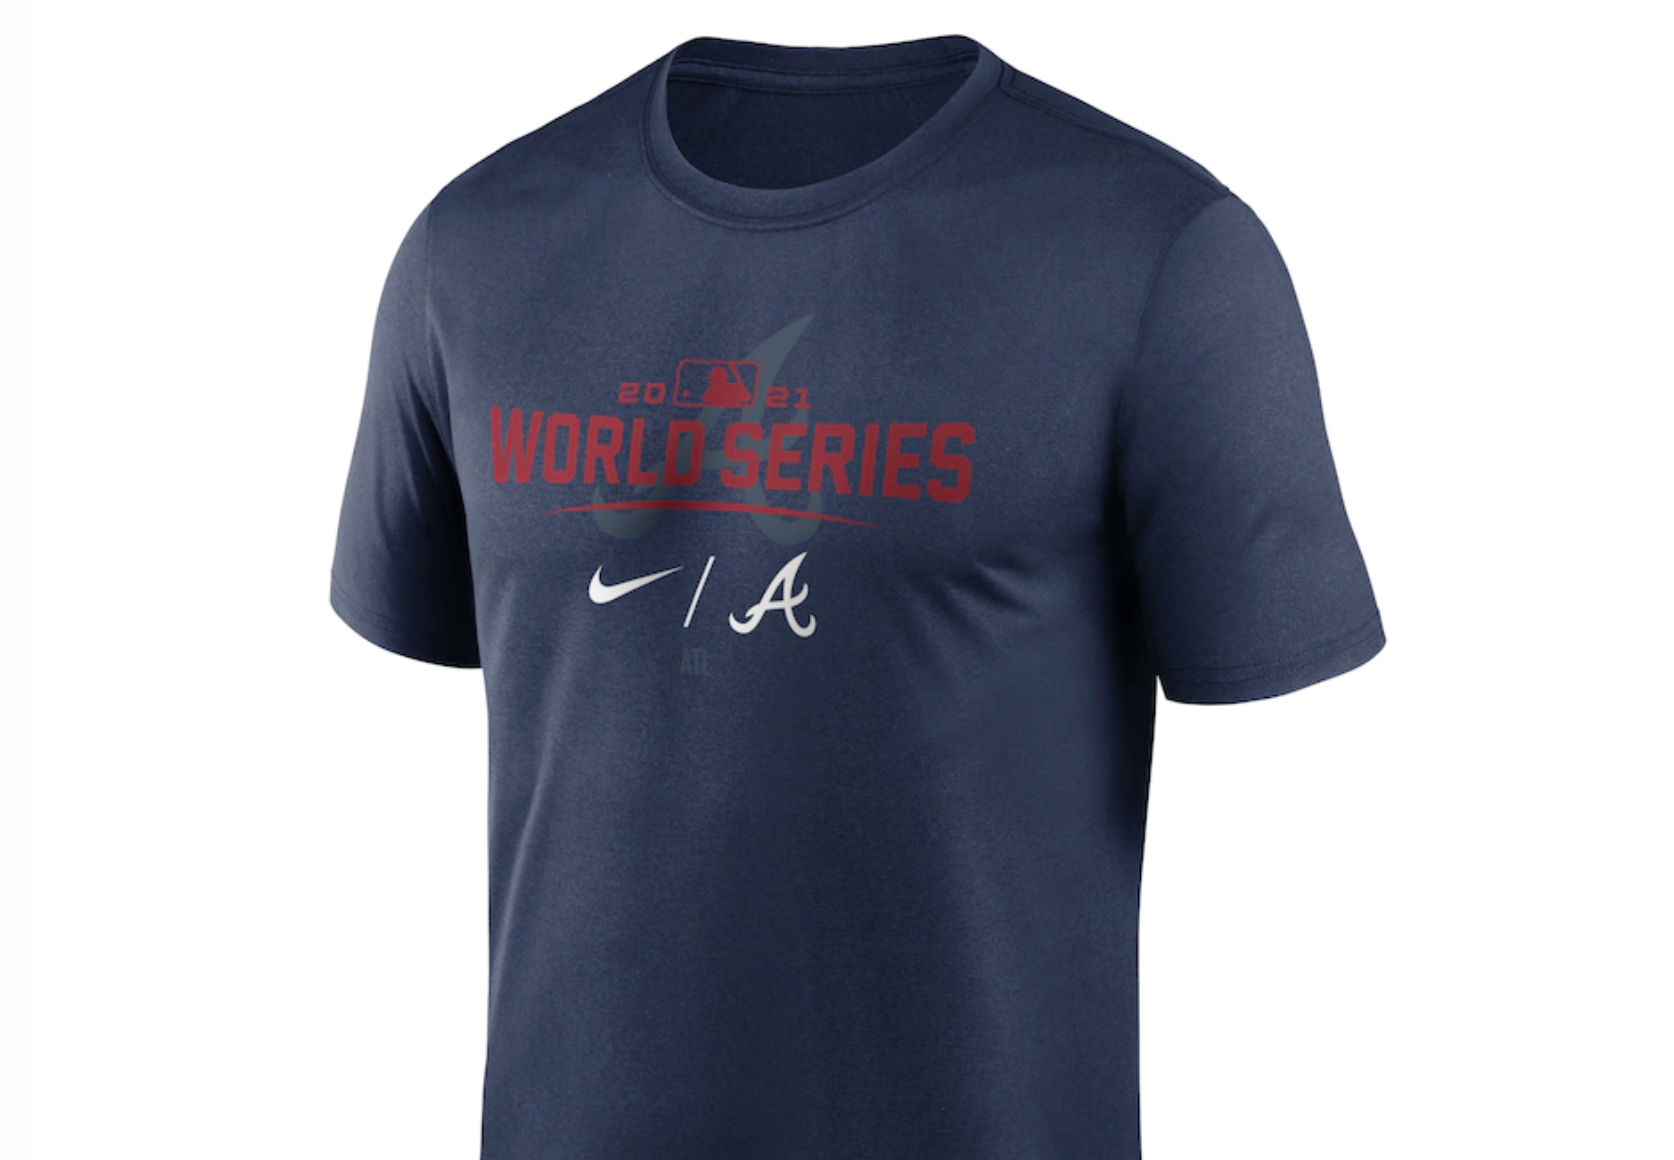 Braves fans in Middle Georgia rush to buy World Series gear